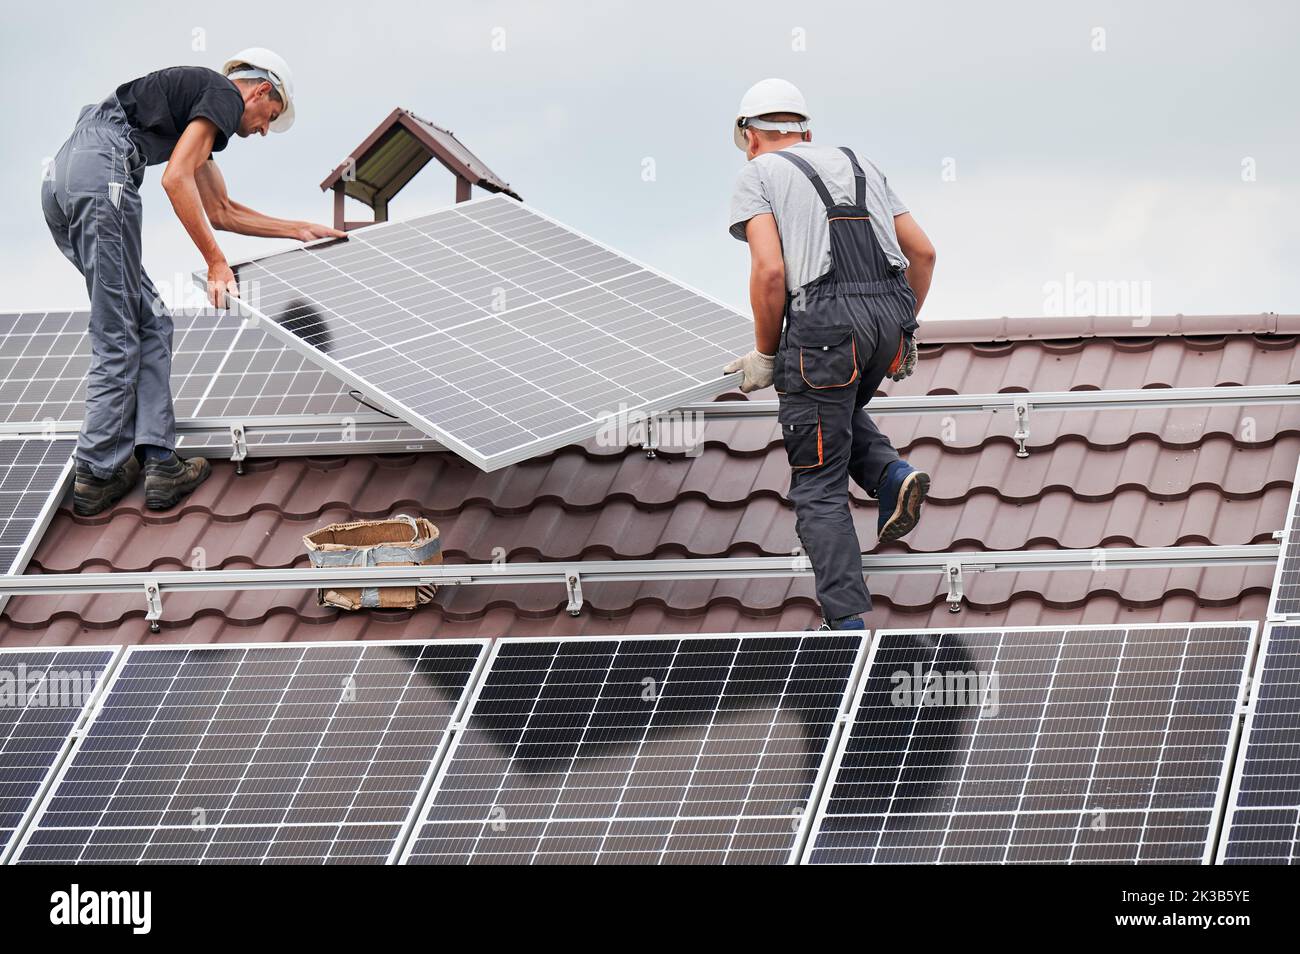 Men technicians lifting up photovoltaic solar moduls on roof of house. Workmen in helmets installing solar panel system outdoors. Concept of alternative and renewable energy. Stock Photo